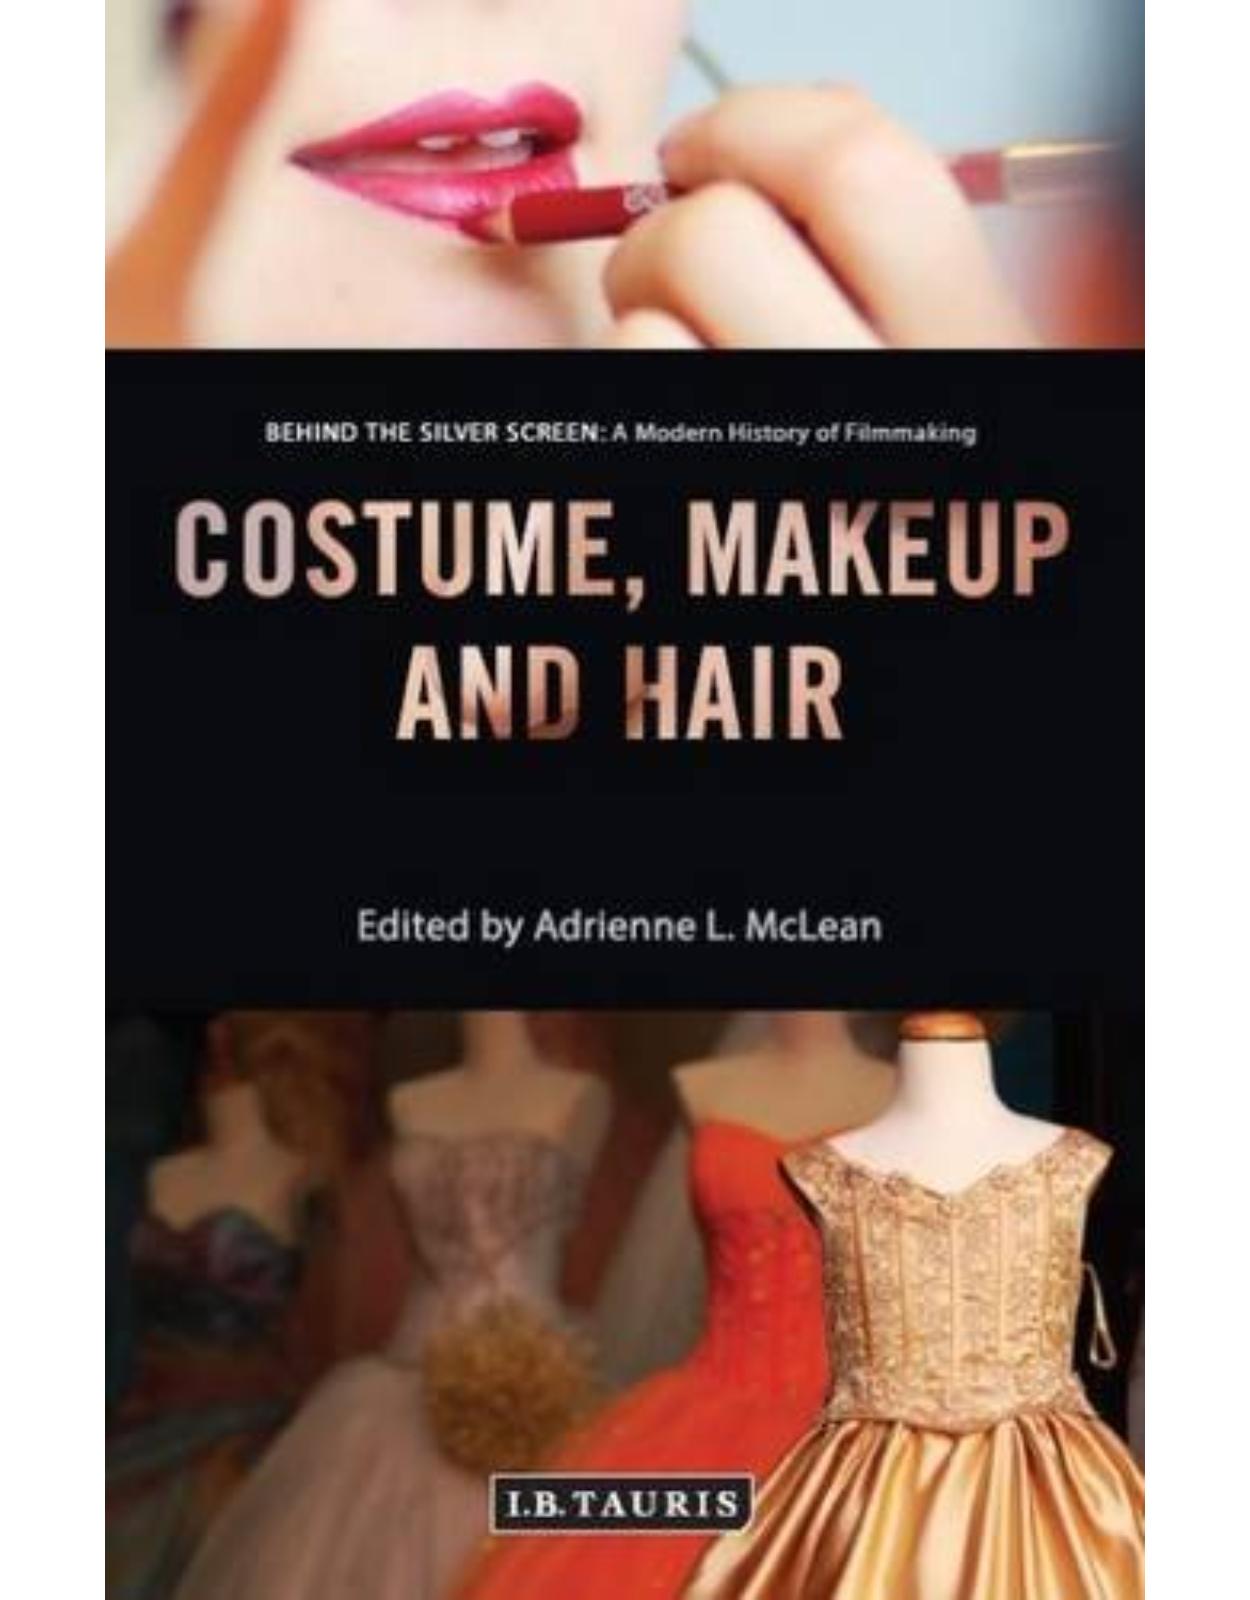 Costume, Makeup and Hair (Behind the Silver Screen: A Modern History of Filmmaking)